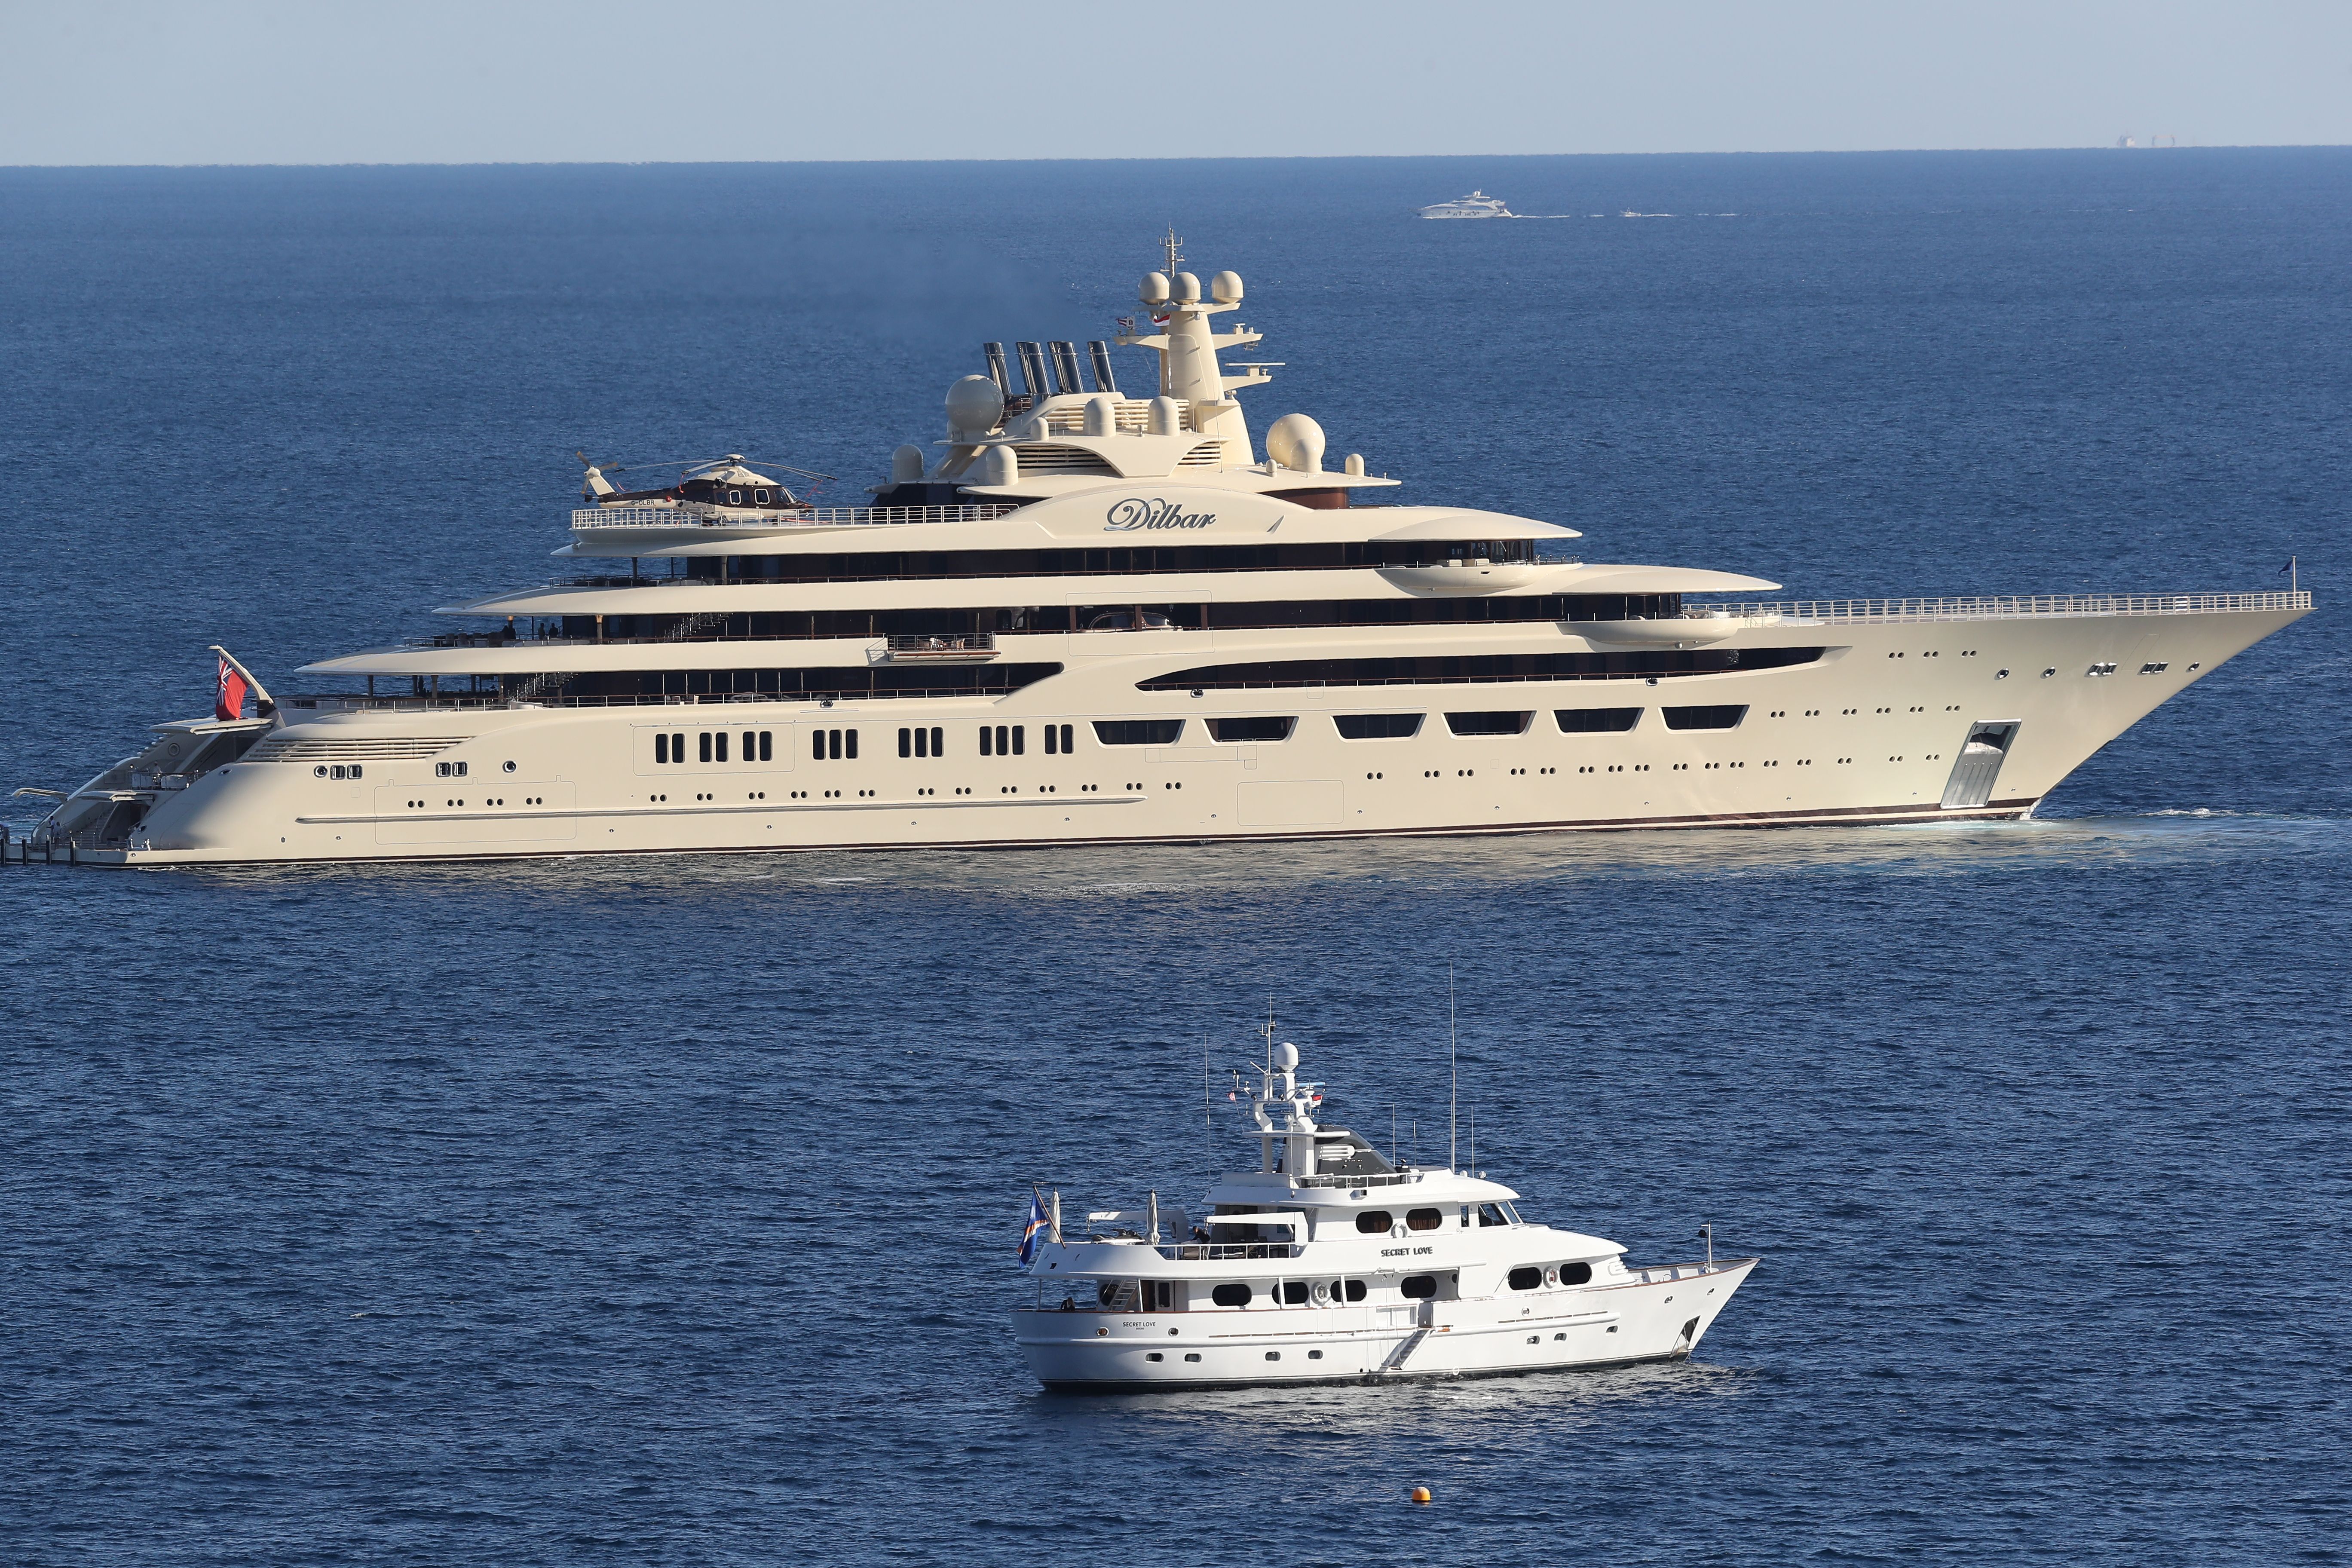 Yacht The Dilbar owned by Alisher Usmanov sails by the Monte Carlo Country Club on day five of the Monte Carlo Rolex Masters at Monte-Carlo Sporting Club on April 20, 2017 in Monte-Carlo, Monaco. 